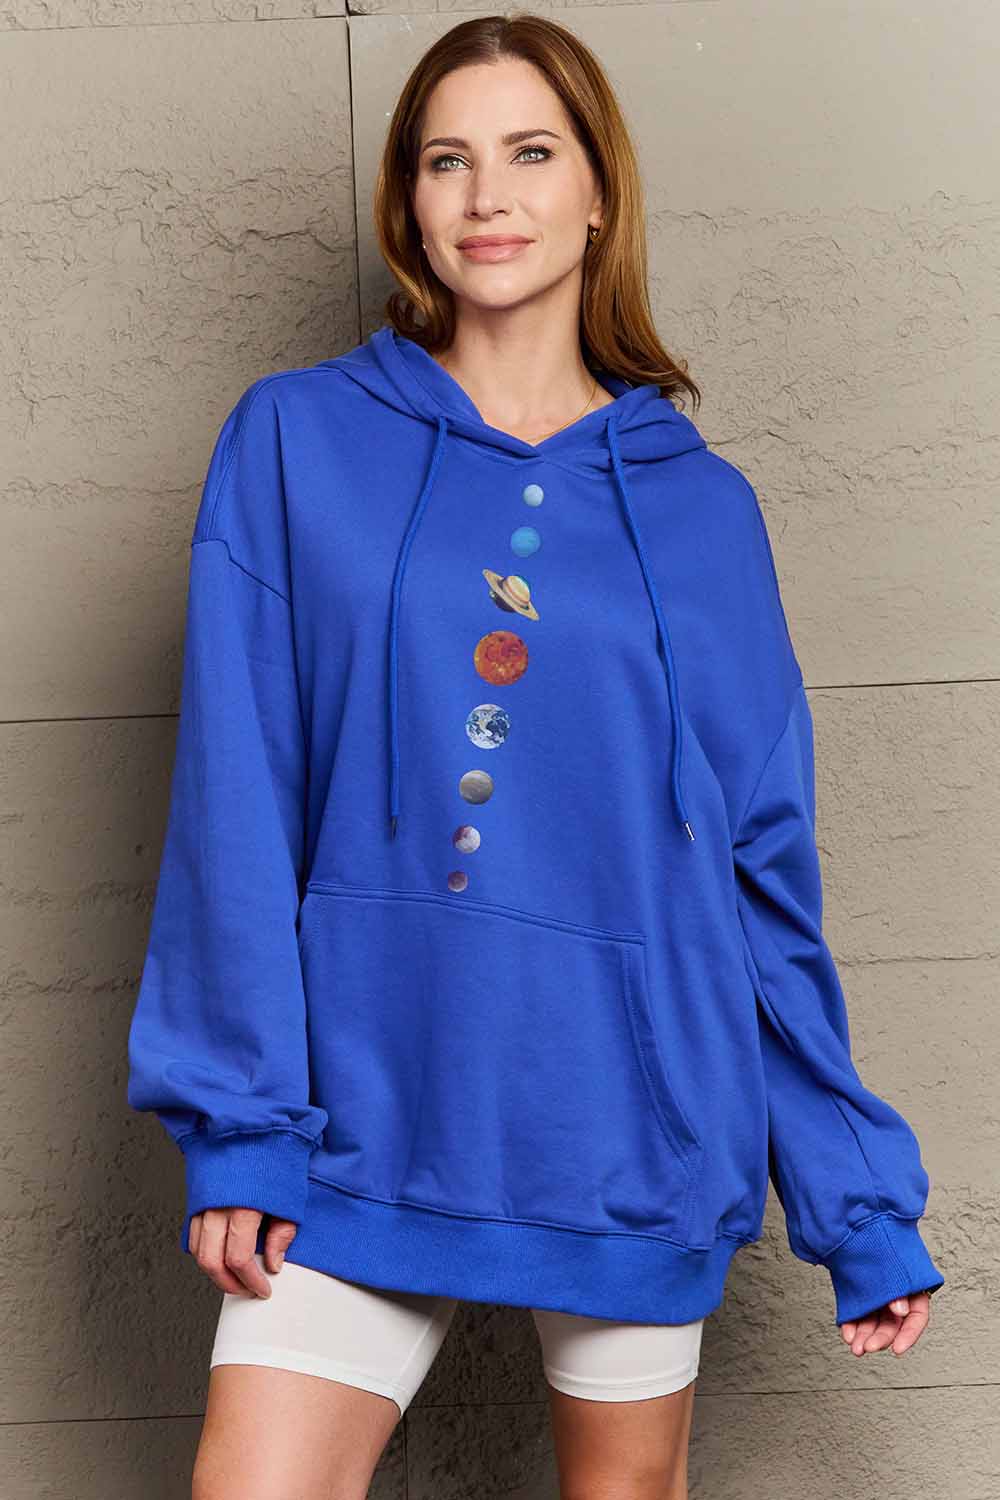 Simply Love Simply Love Full Size Dropped Shoulder Solar System Graphic Hoodie